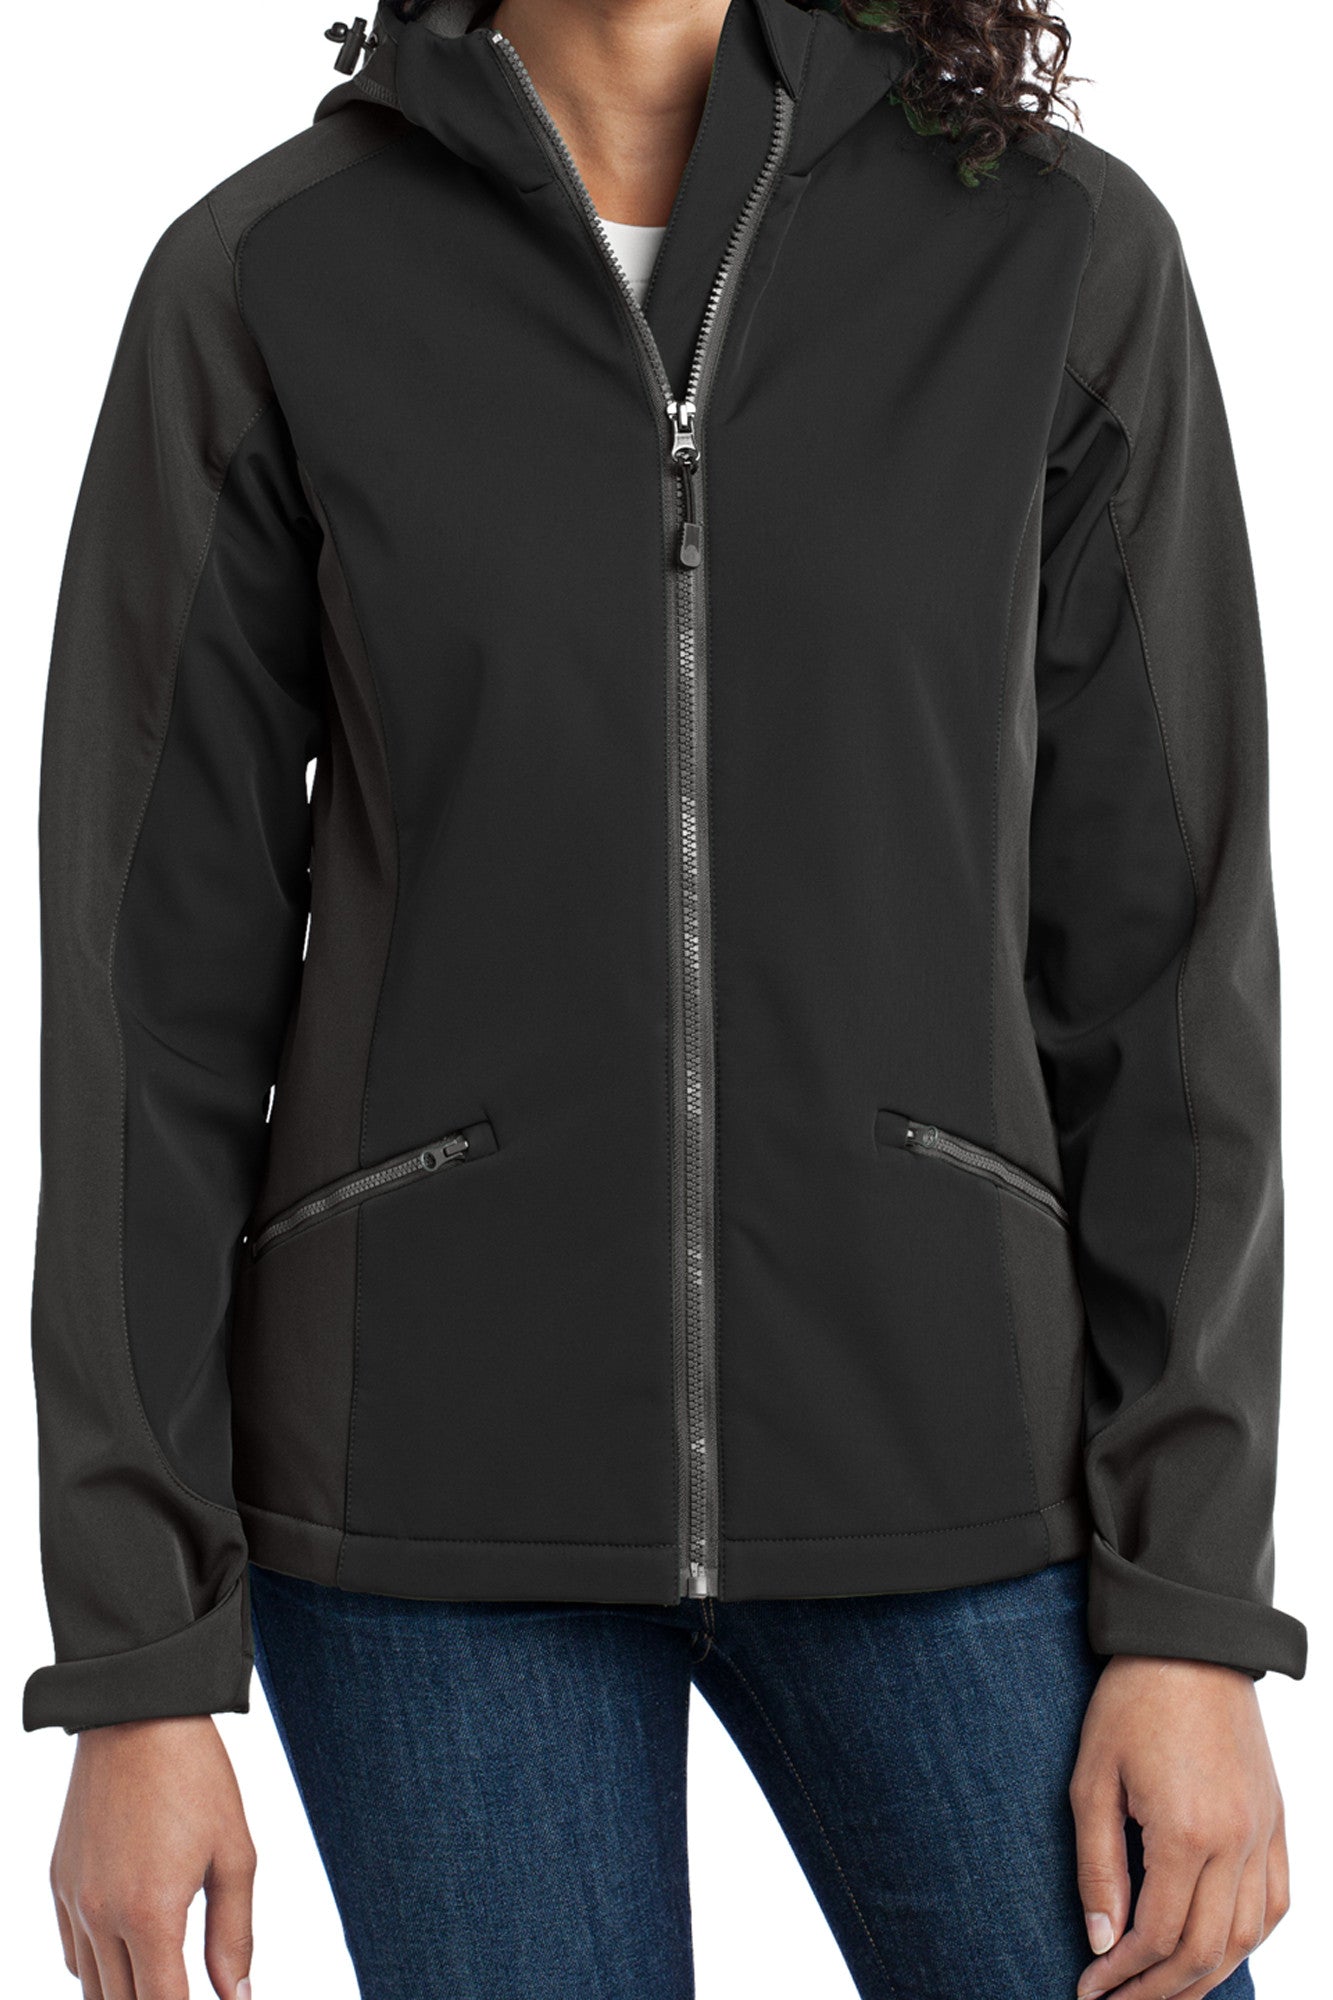 Womens Backroads Softshell Jacket | Outer Style Online Store